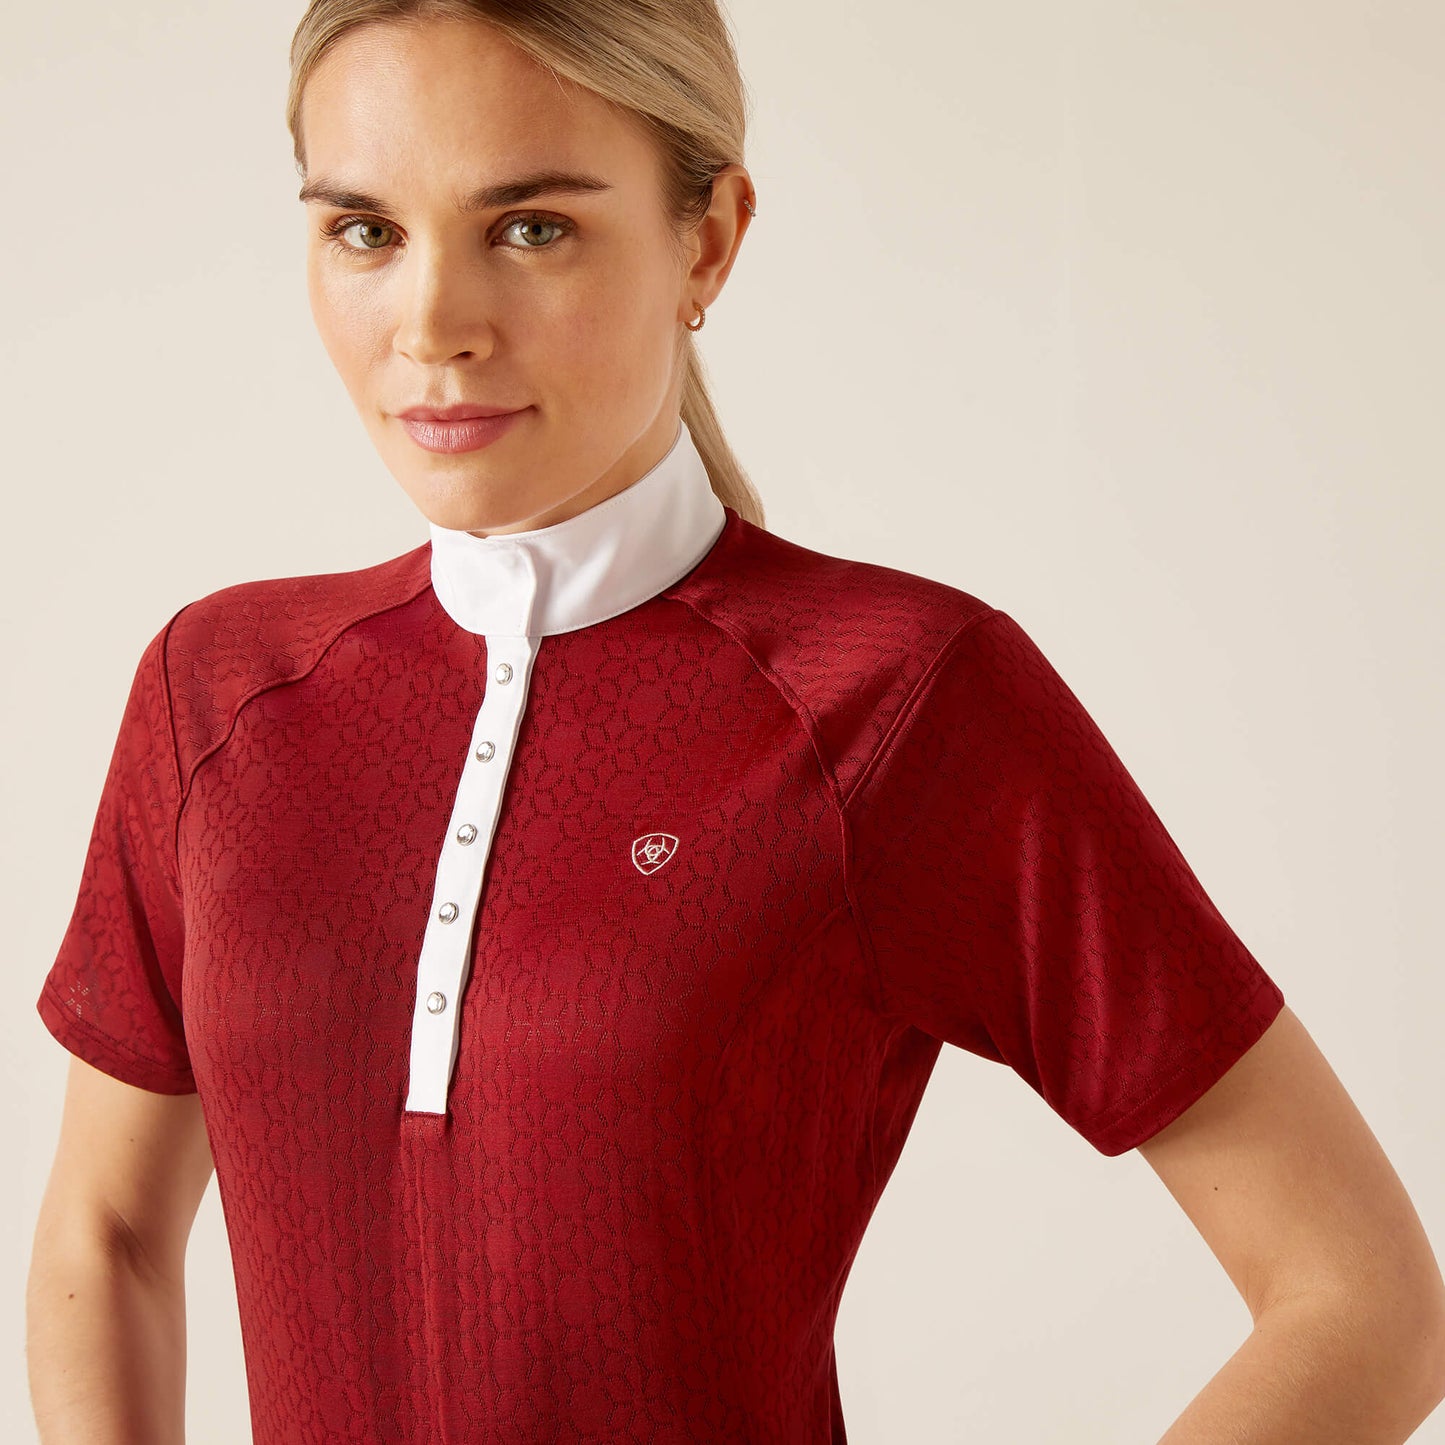 Ariat Sun-Dried Tomato Showstopper 3.0 Show Shirt